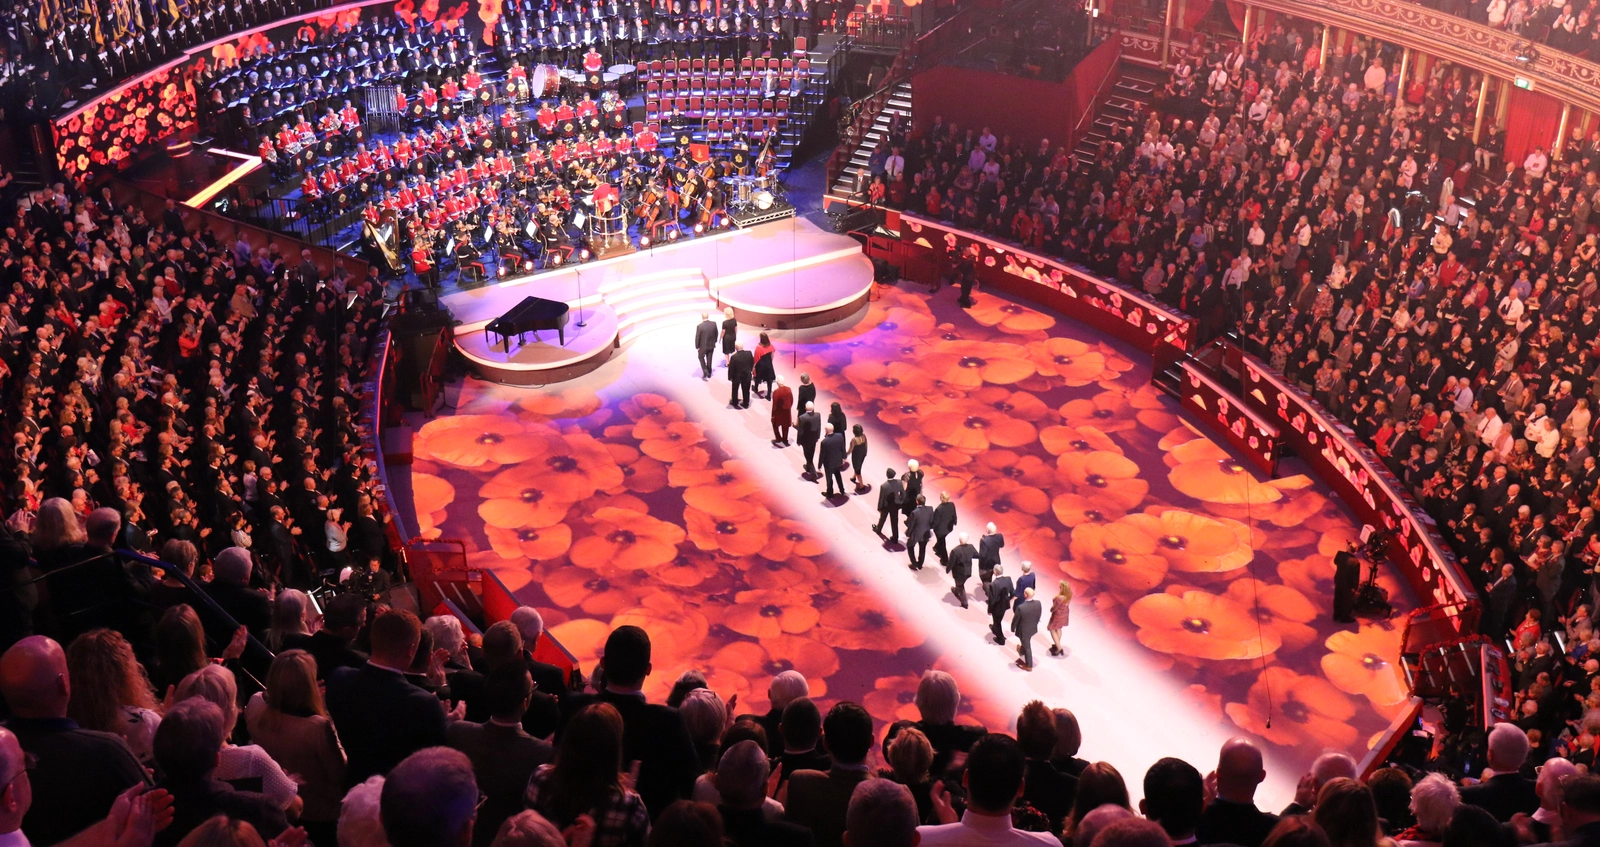 Arial view of the Festival of Remembrance where members get priority tickets and exclusive offers